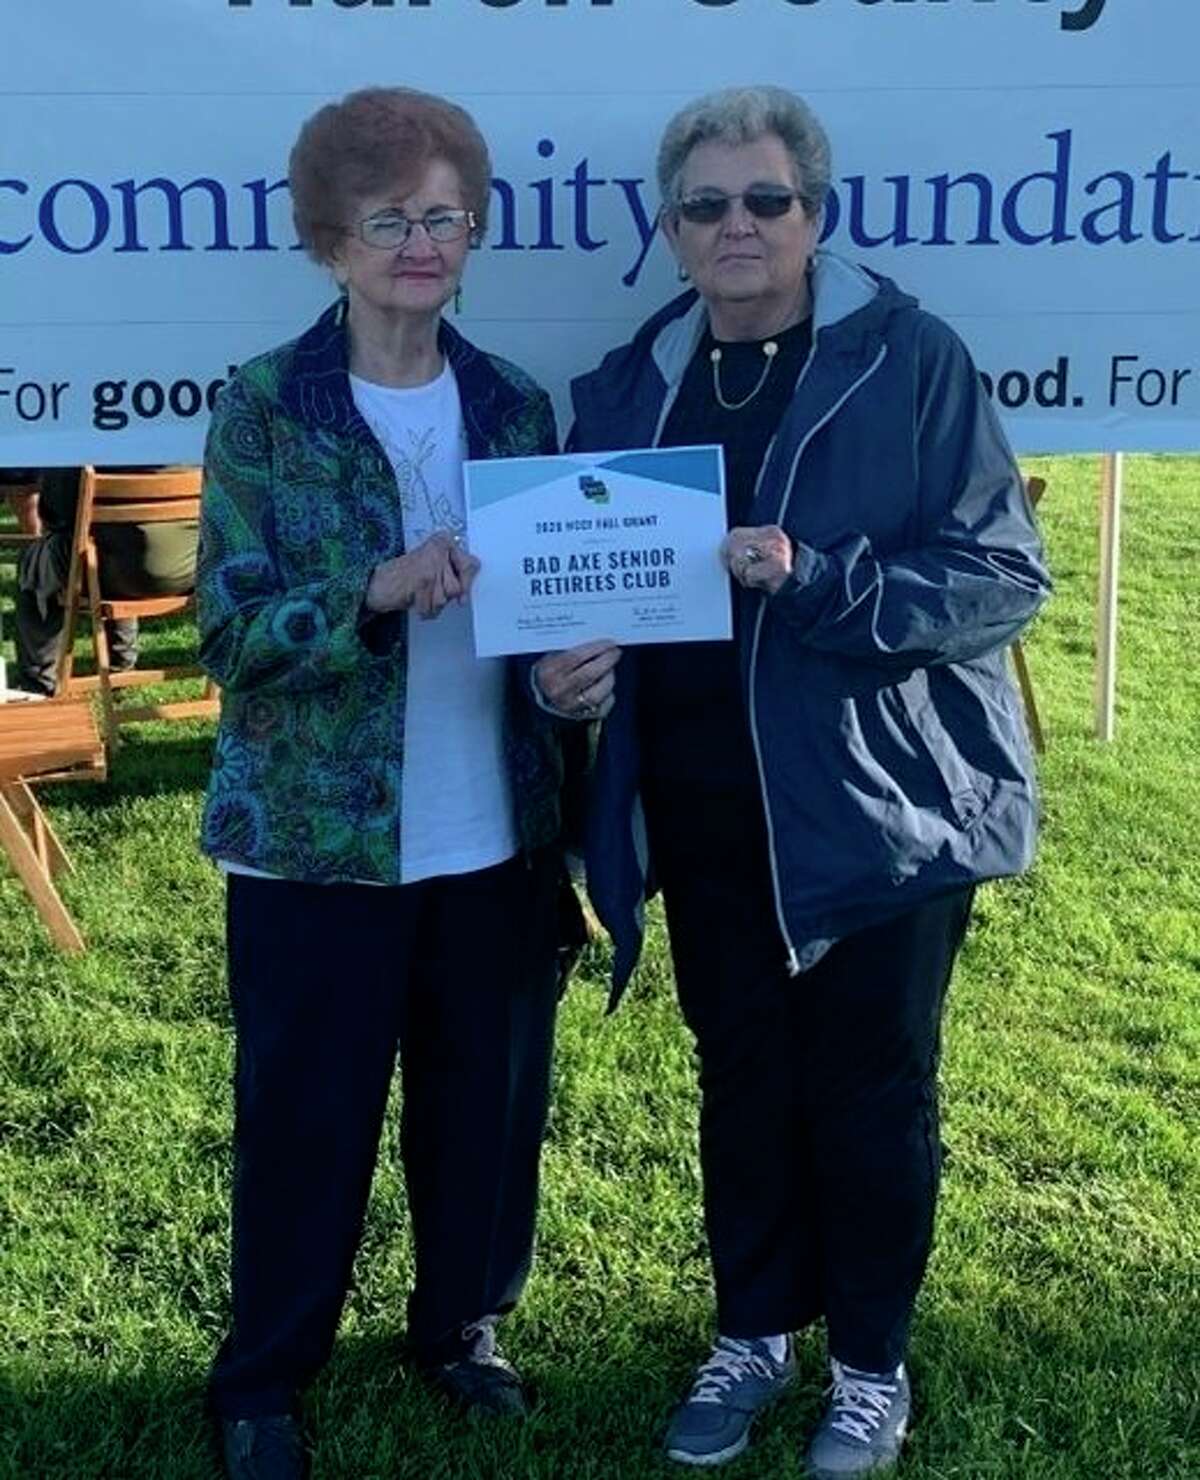 Pictured accepting the grant award is (left) Donna Poppeck, club treasurer, and (right) Mary Gilbert, club secretary. (Submitted Photo)